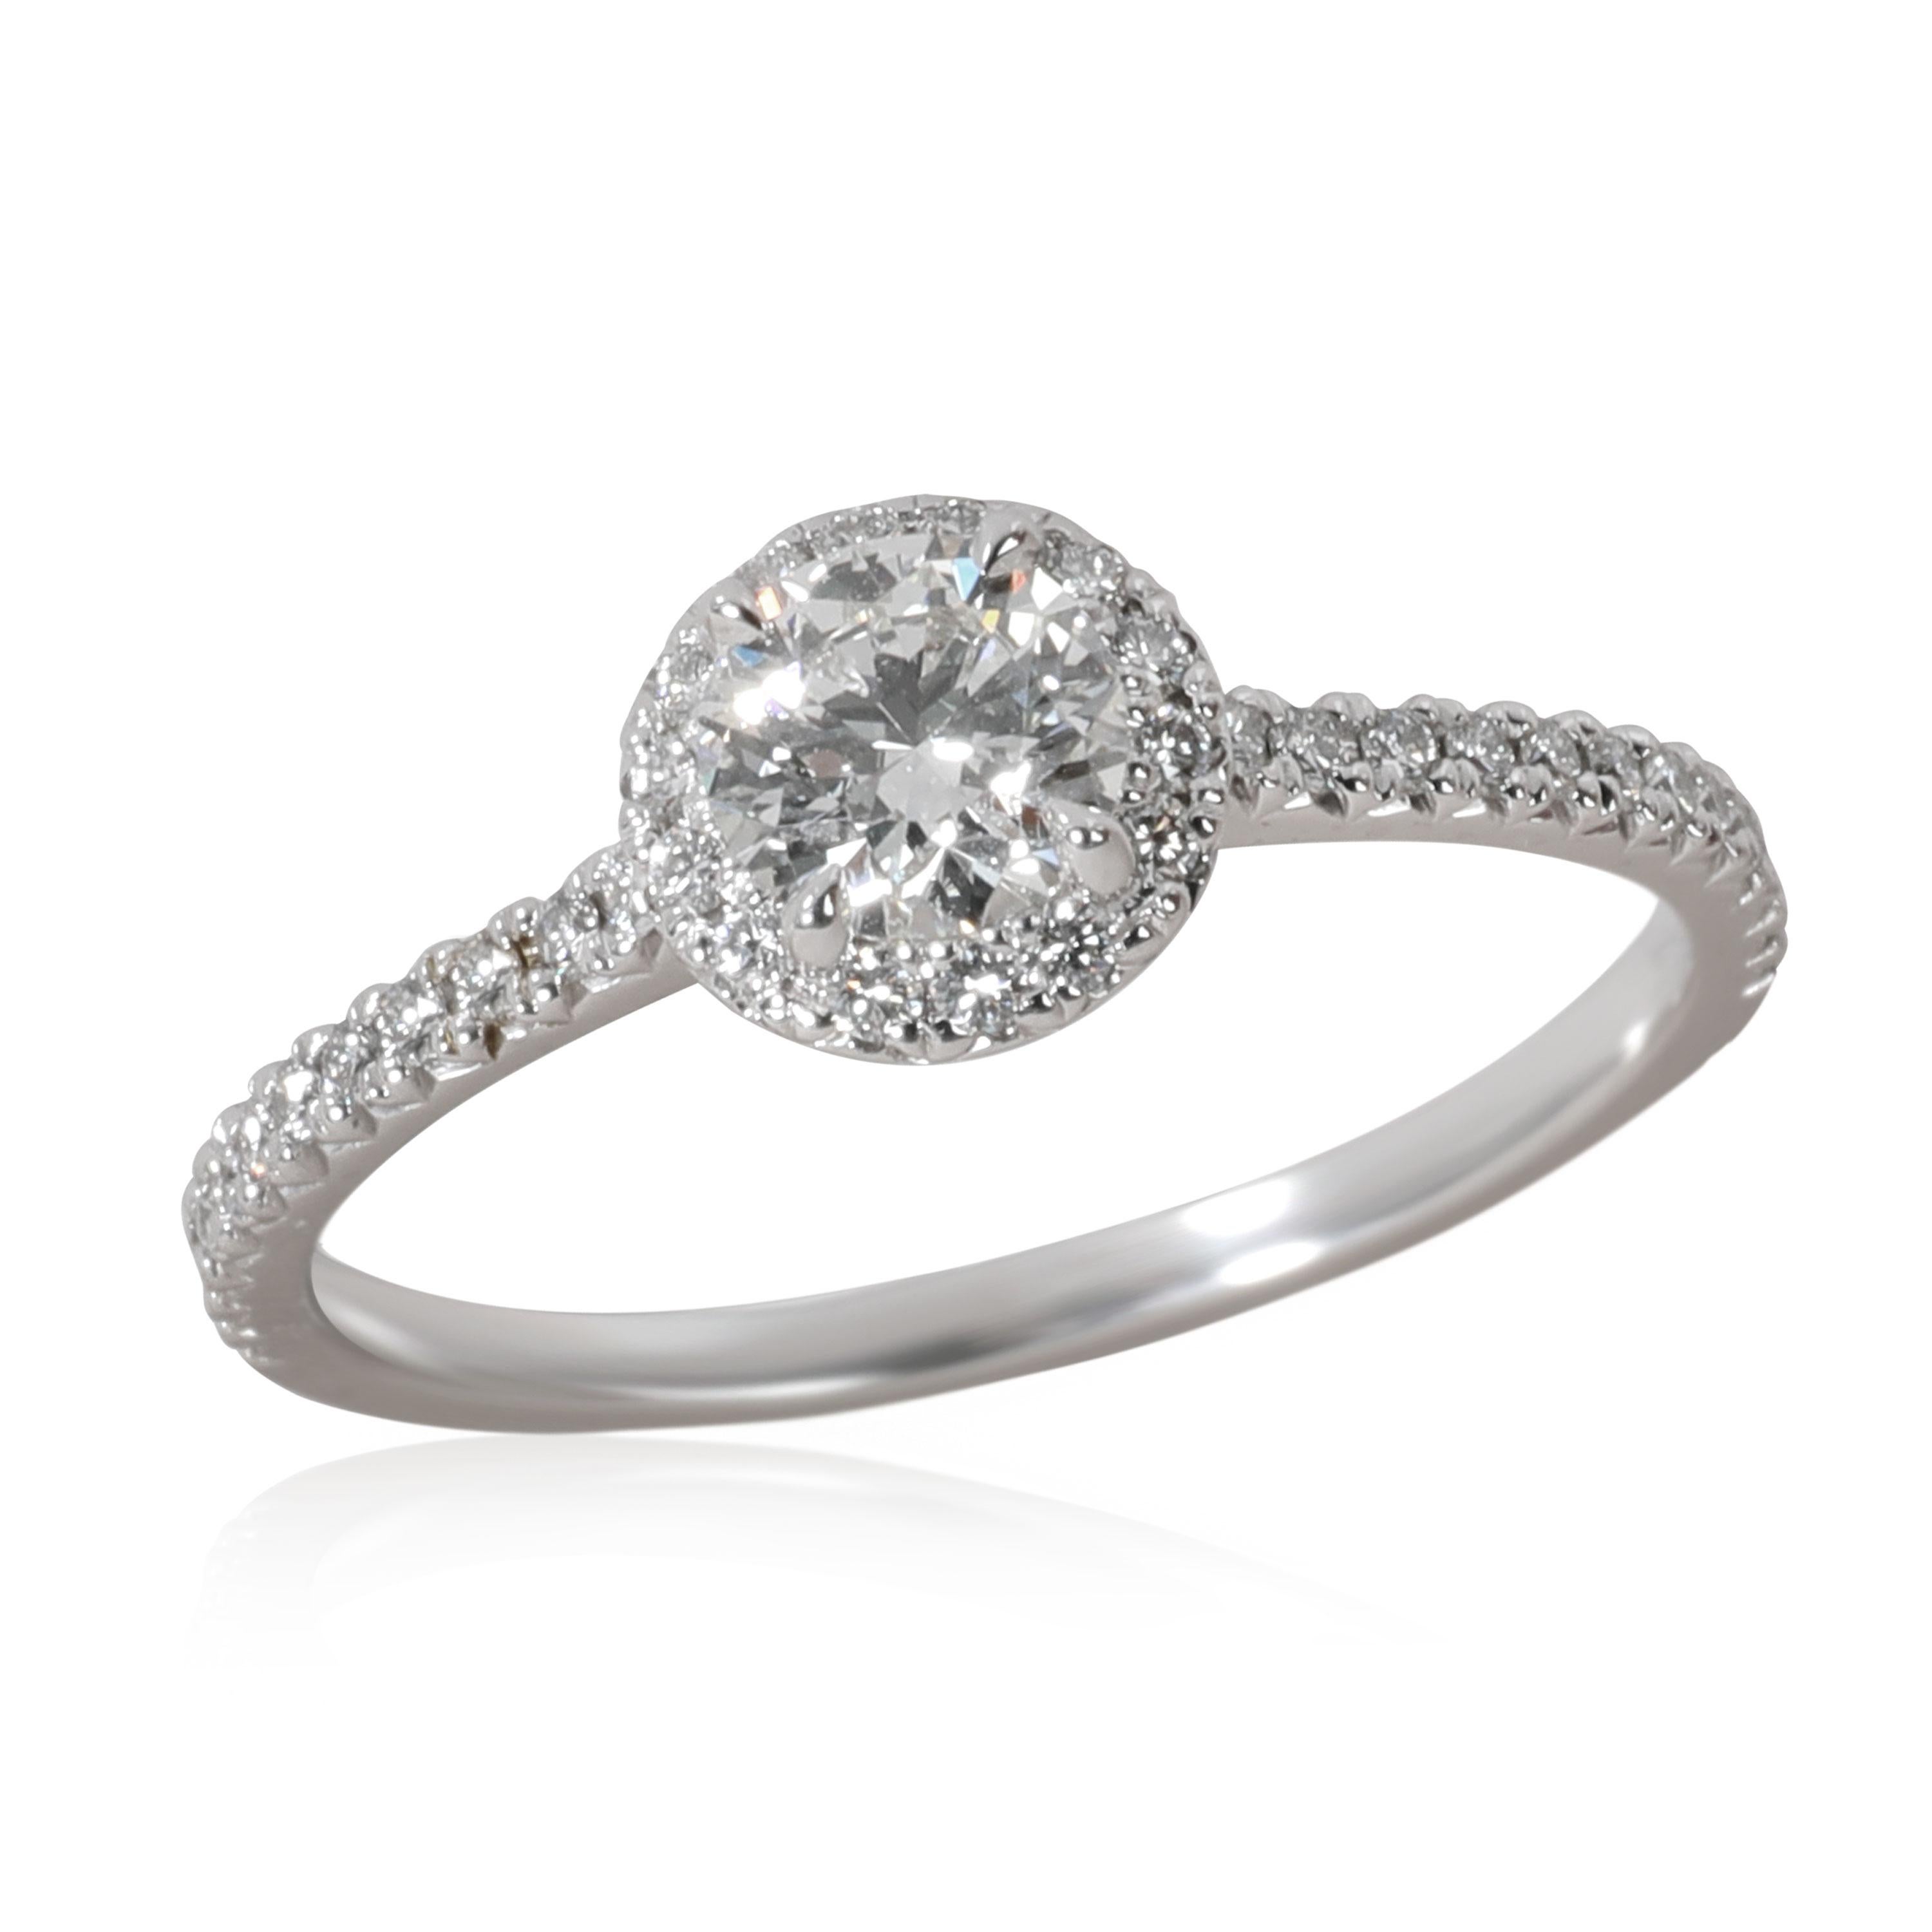 Tiffany & Co. Soleste Halo Diamond Engagement Ring in Platinum H VVS1 0.55 CTW

PRIMARY DETAILS
SKU: 110548
Listing Title: Tiffany & Co. Soleste Halo Diamond Engagement Ring in Platinum H VVS1 0.55 CTW
Condition Description: Retails for 6550 USD. In